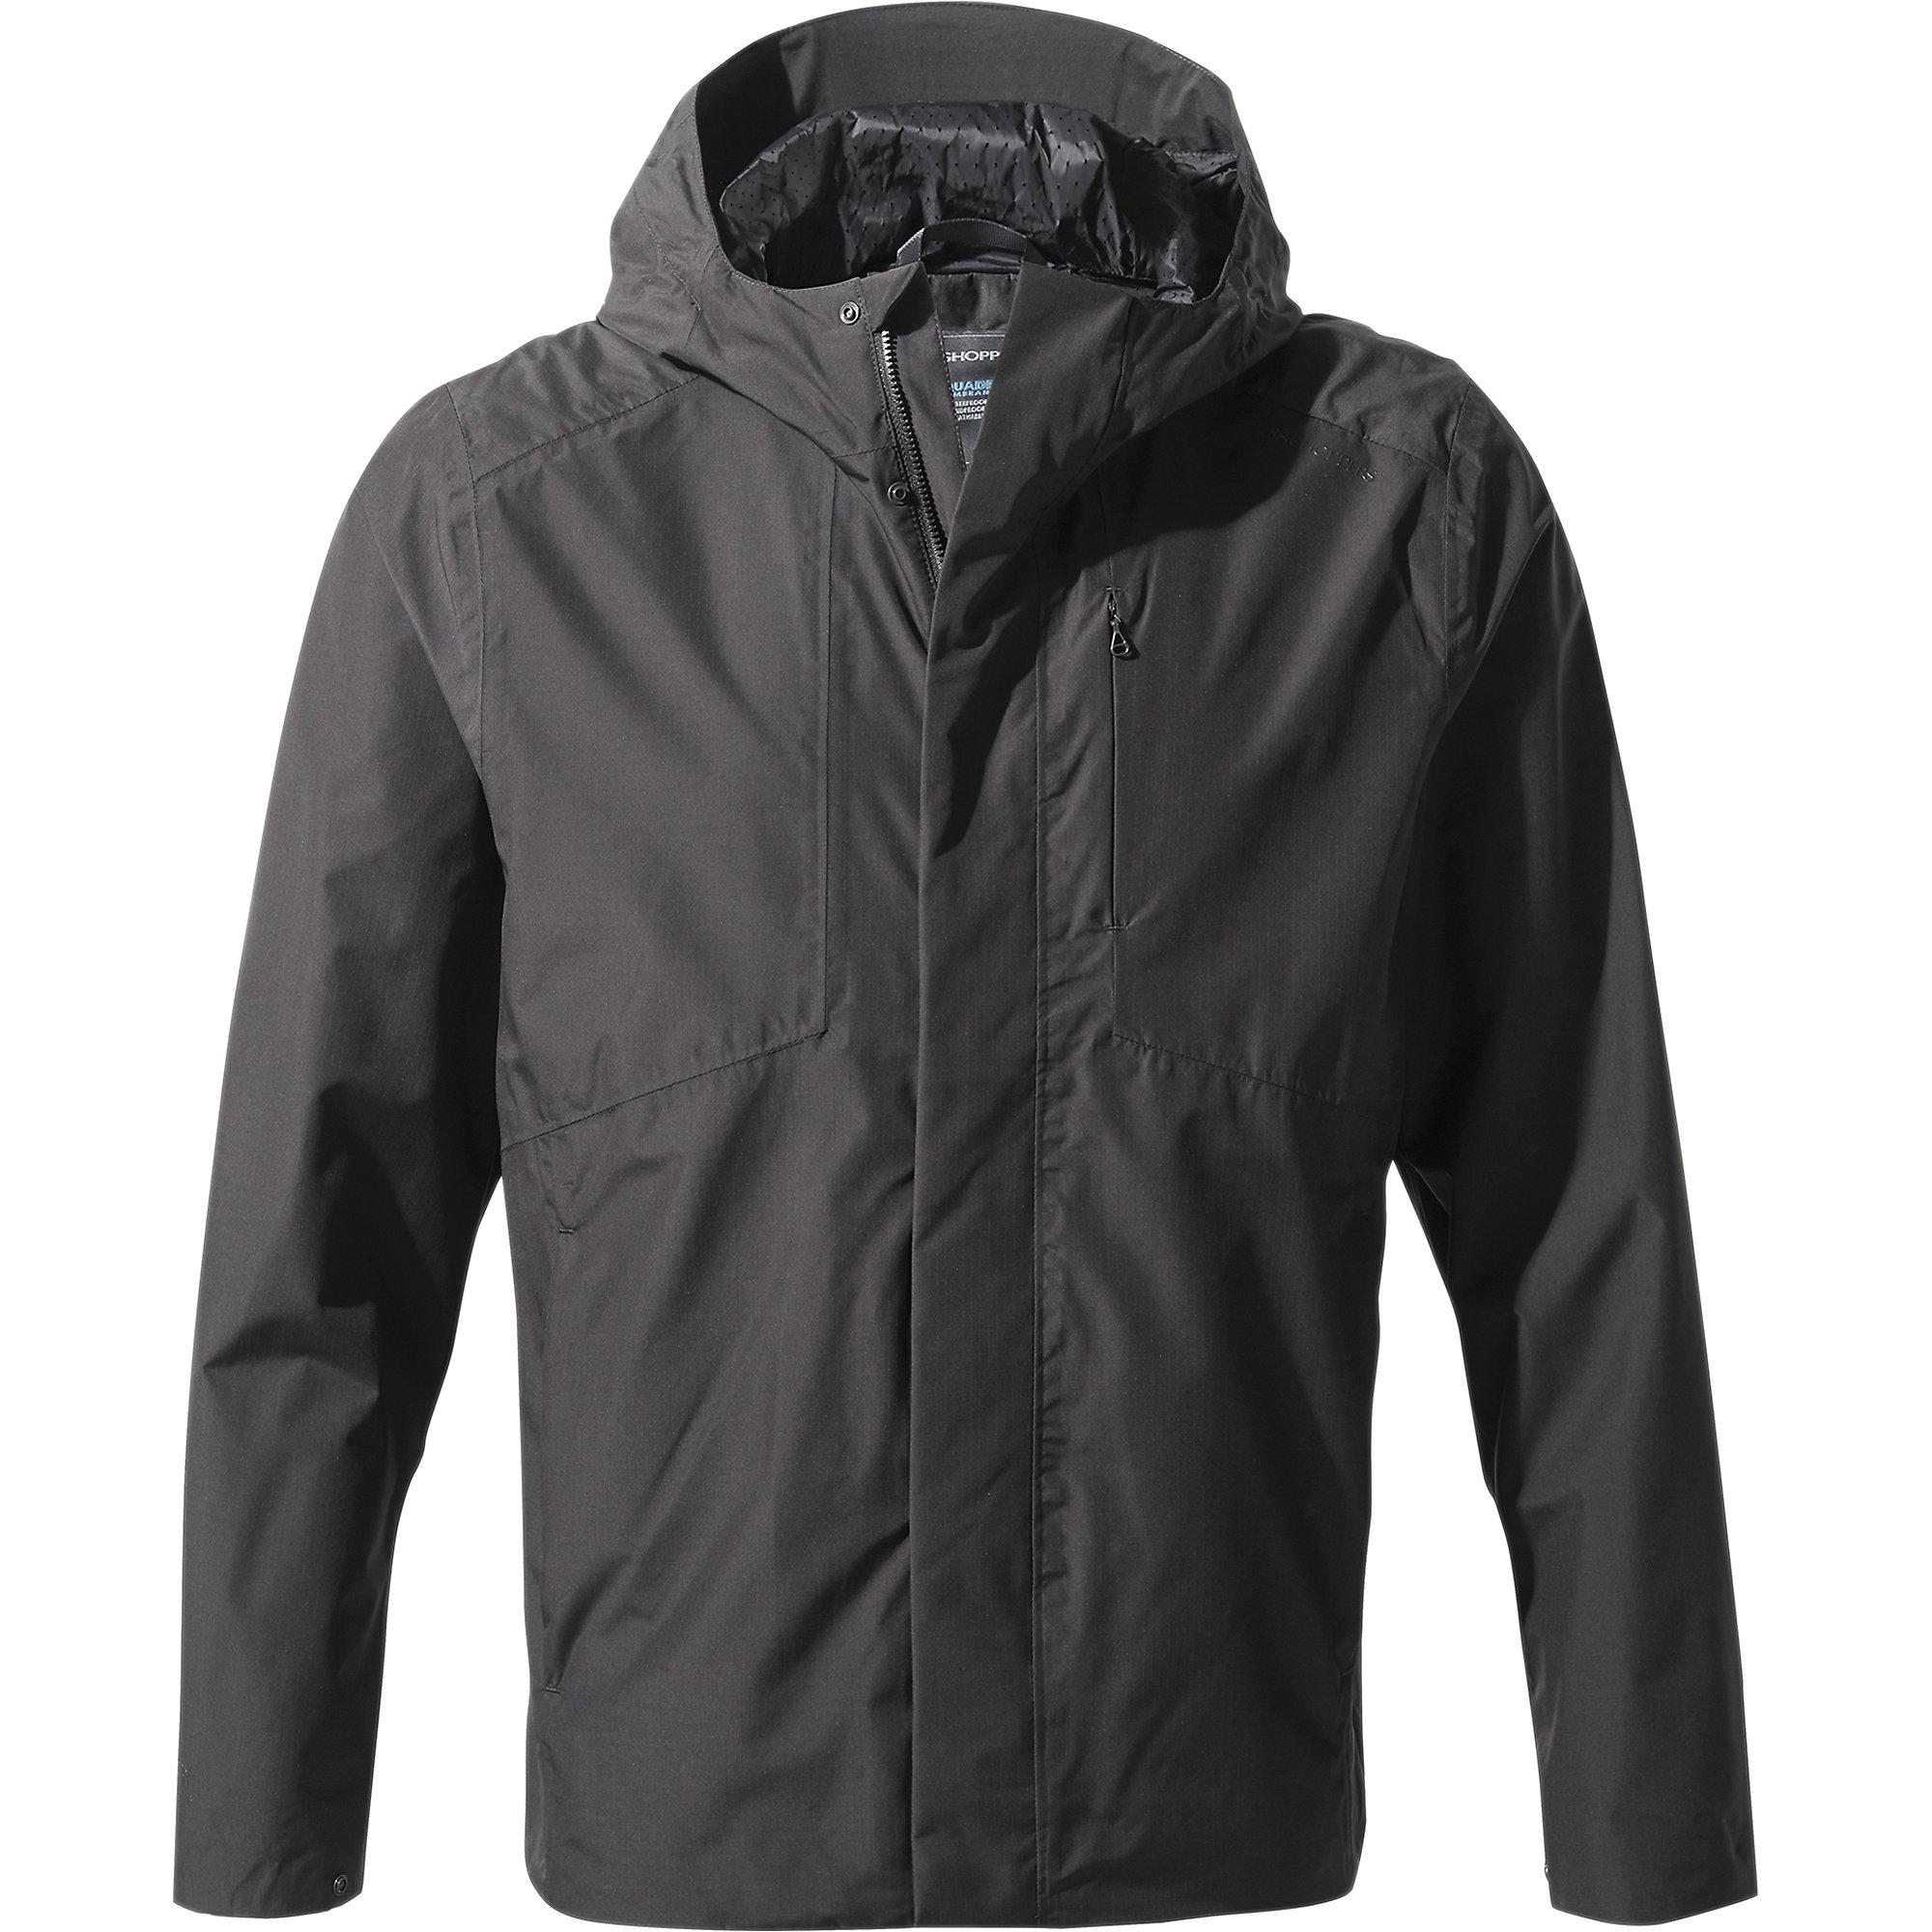 Craghoppers Synthetic Treviso Jacket in Black for Men - Lyst